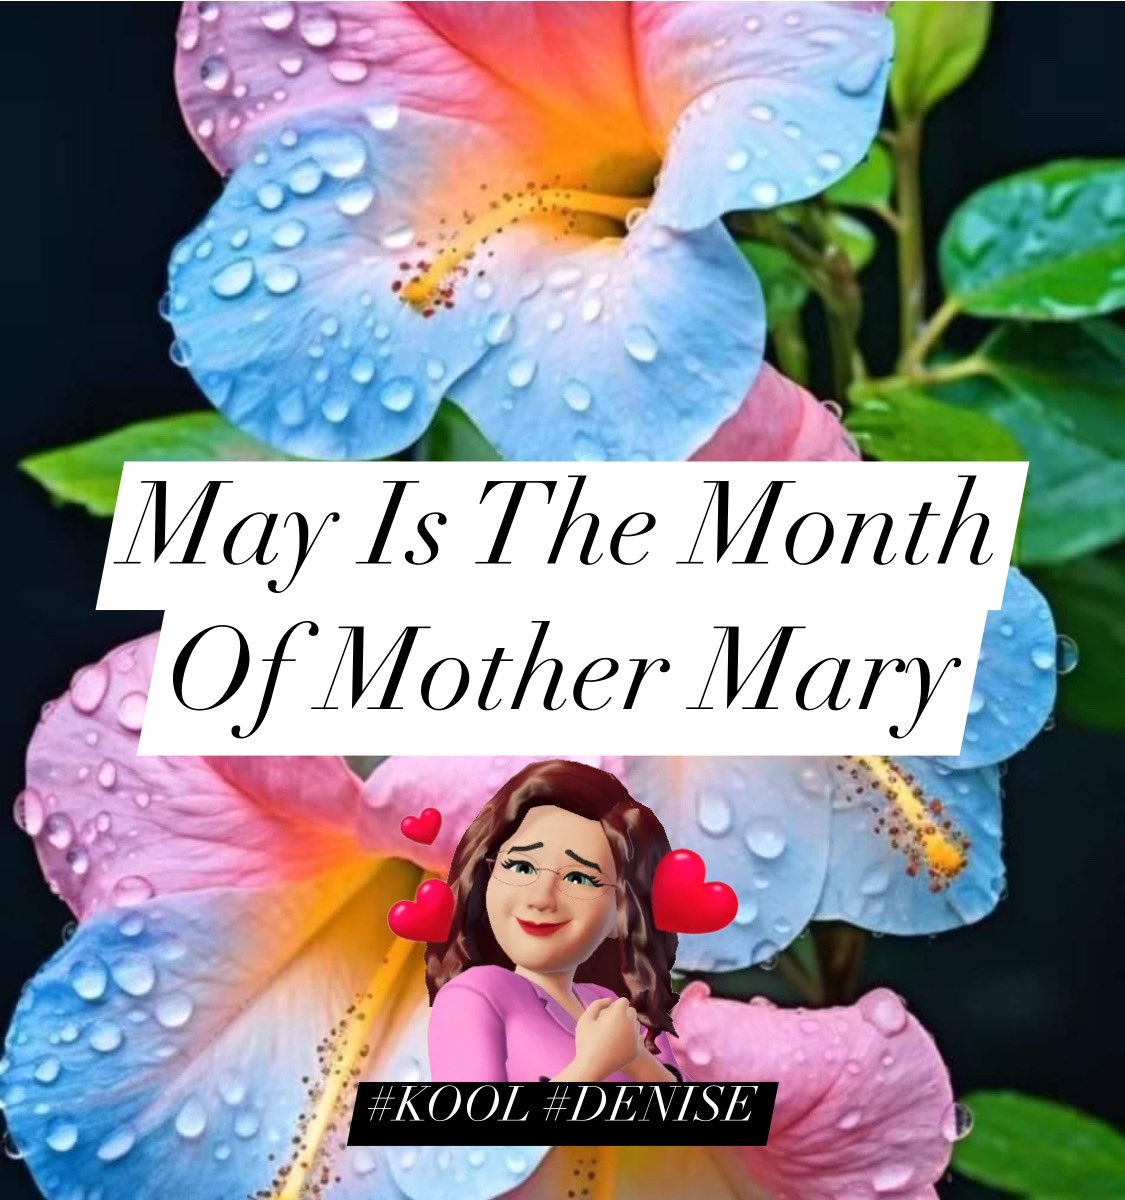 May Is The Month Of Mother Mary

#May

#Celebrate

#MotherMary

#KOOL #DENISE
@KOOL_DENISE